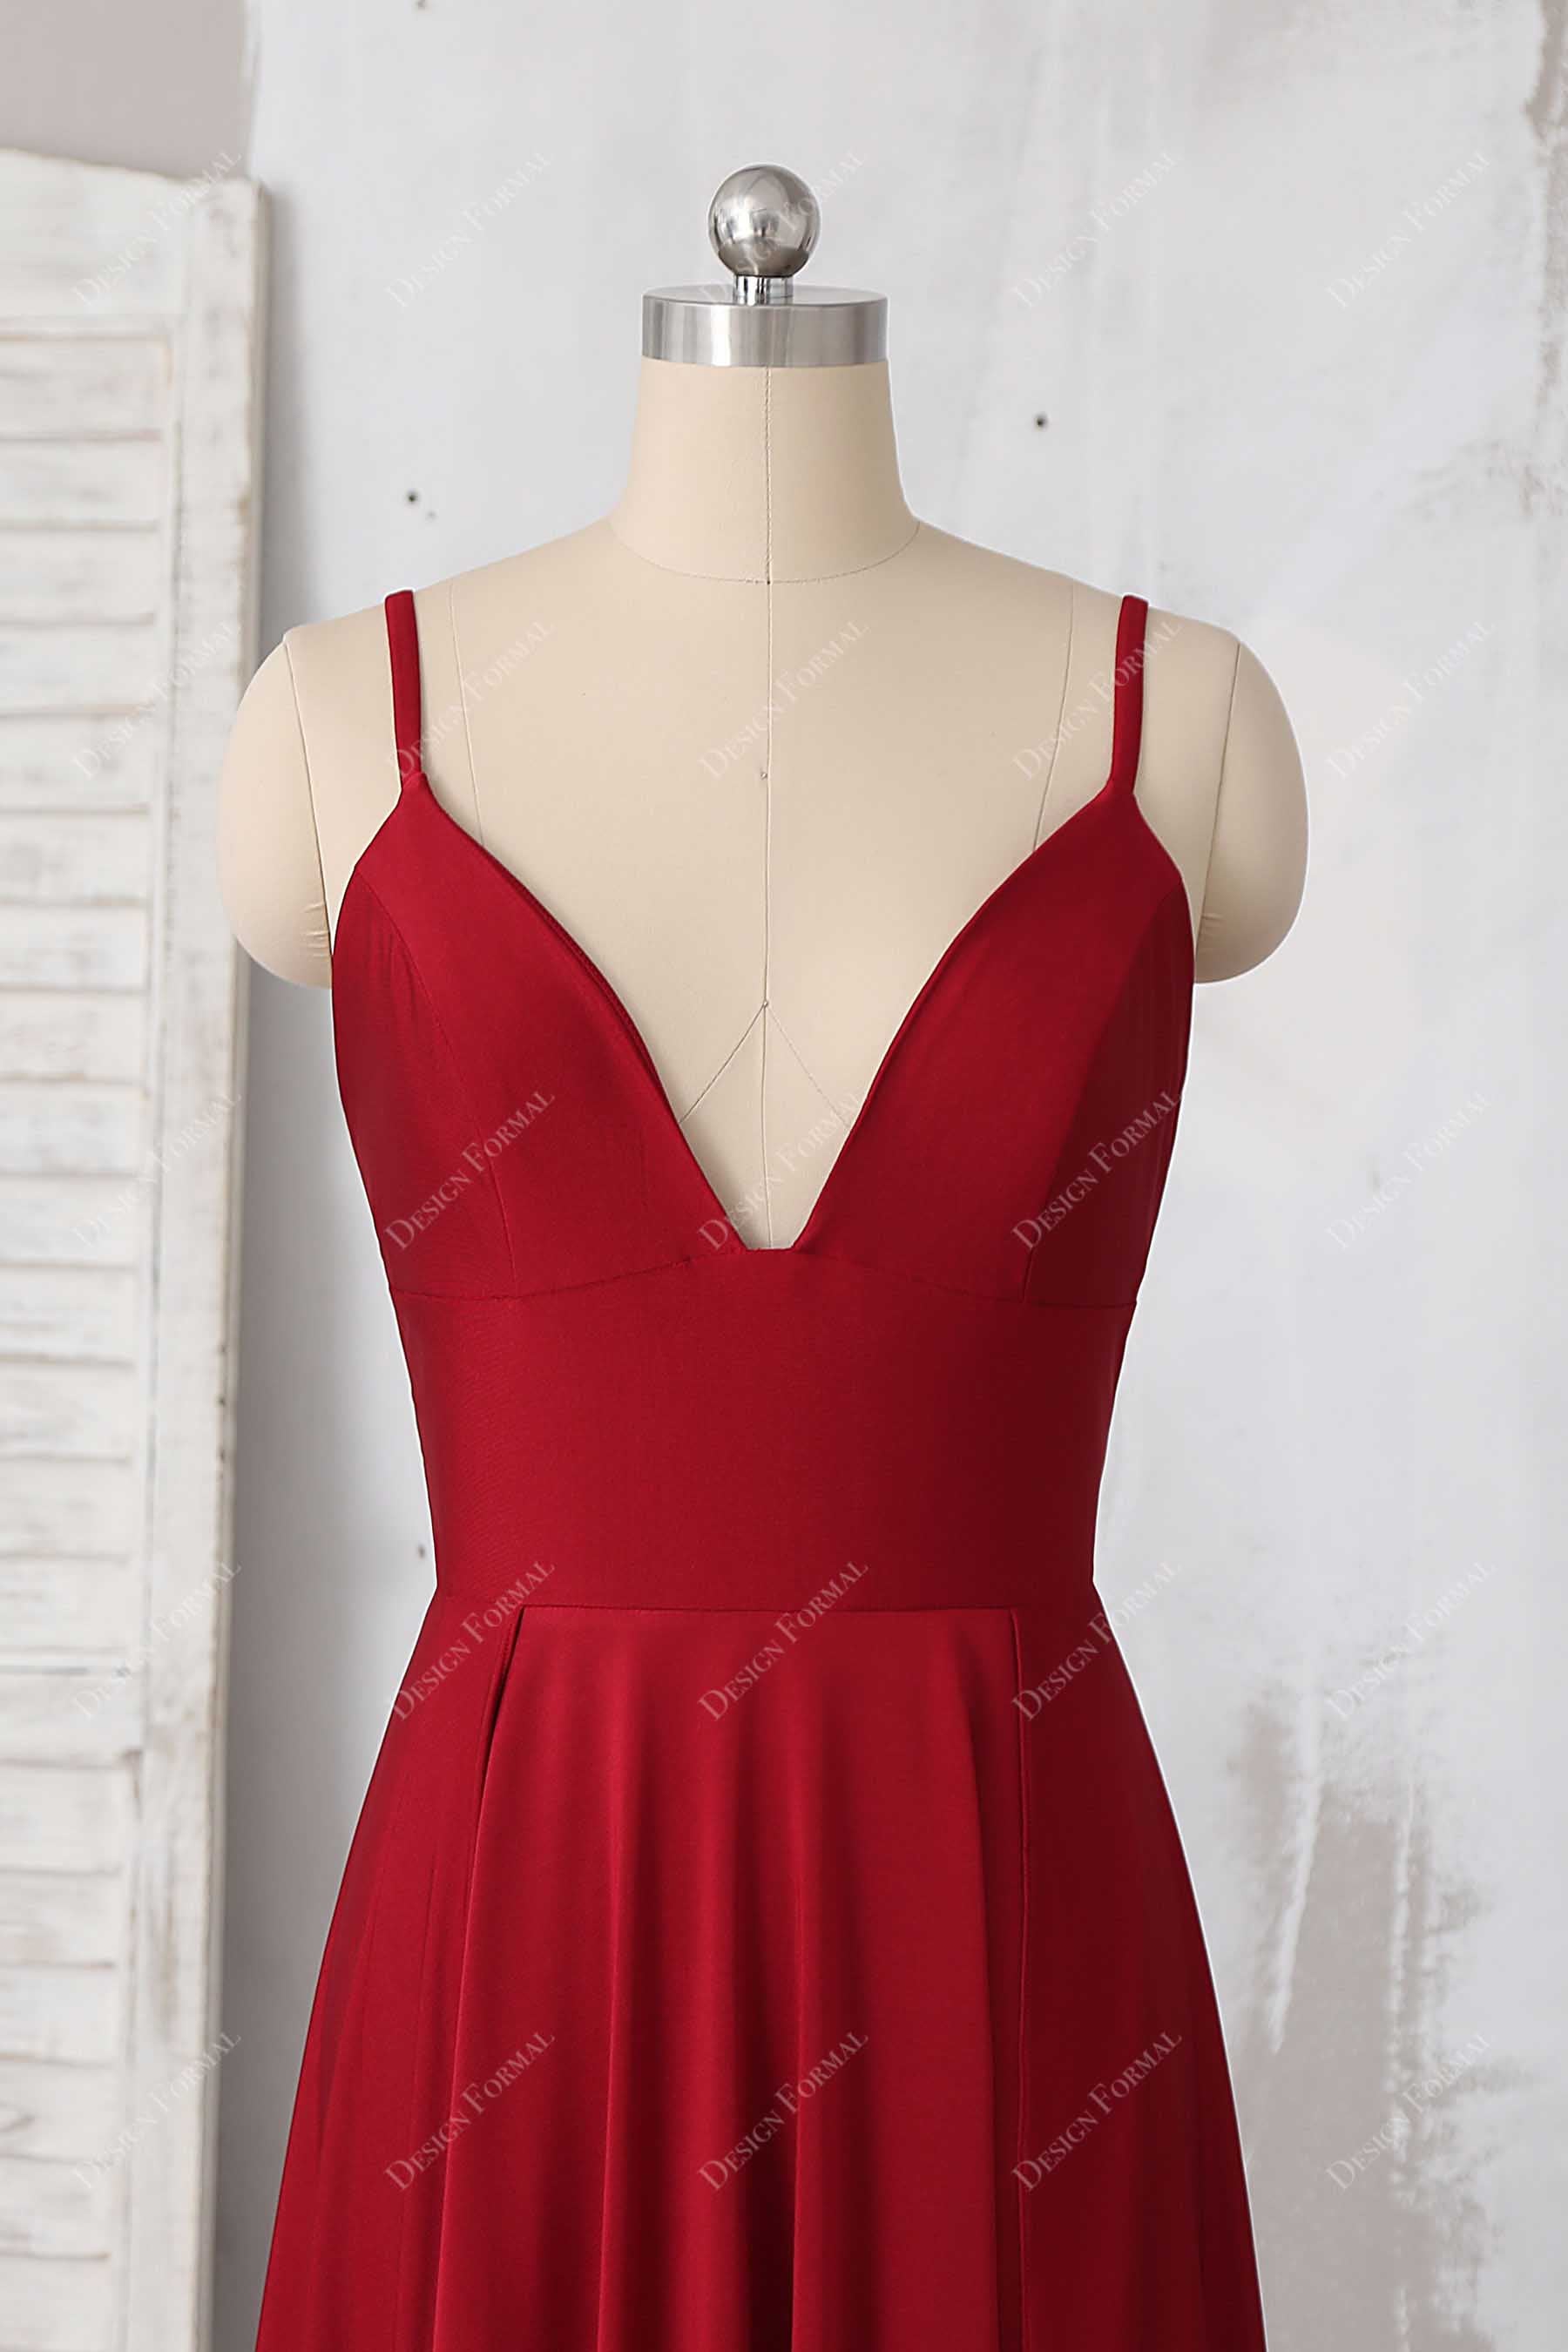 spaghetti straps red plunging sweetheart bodice